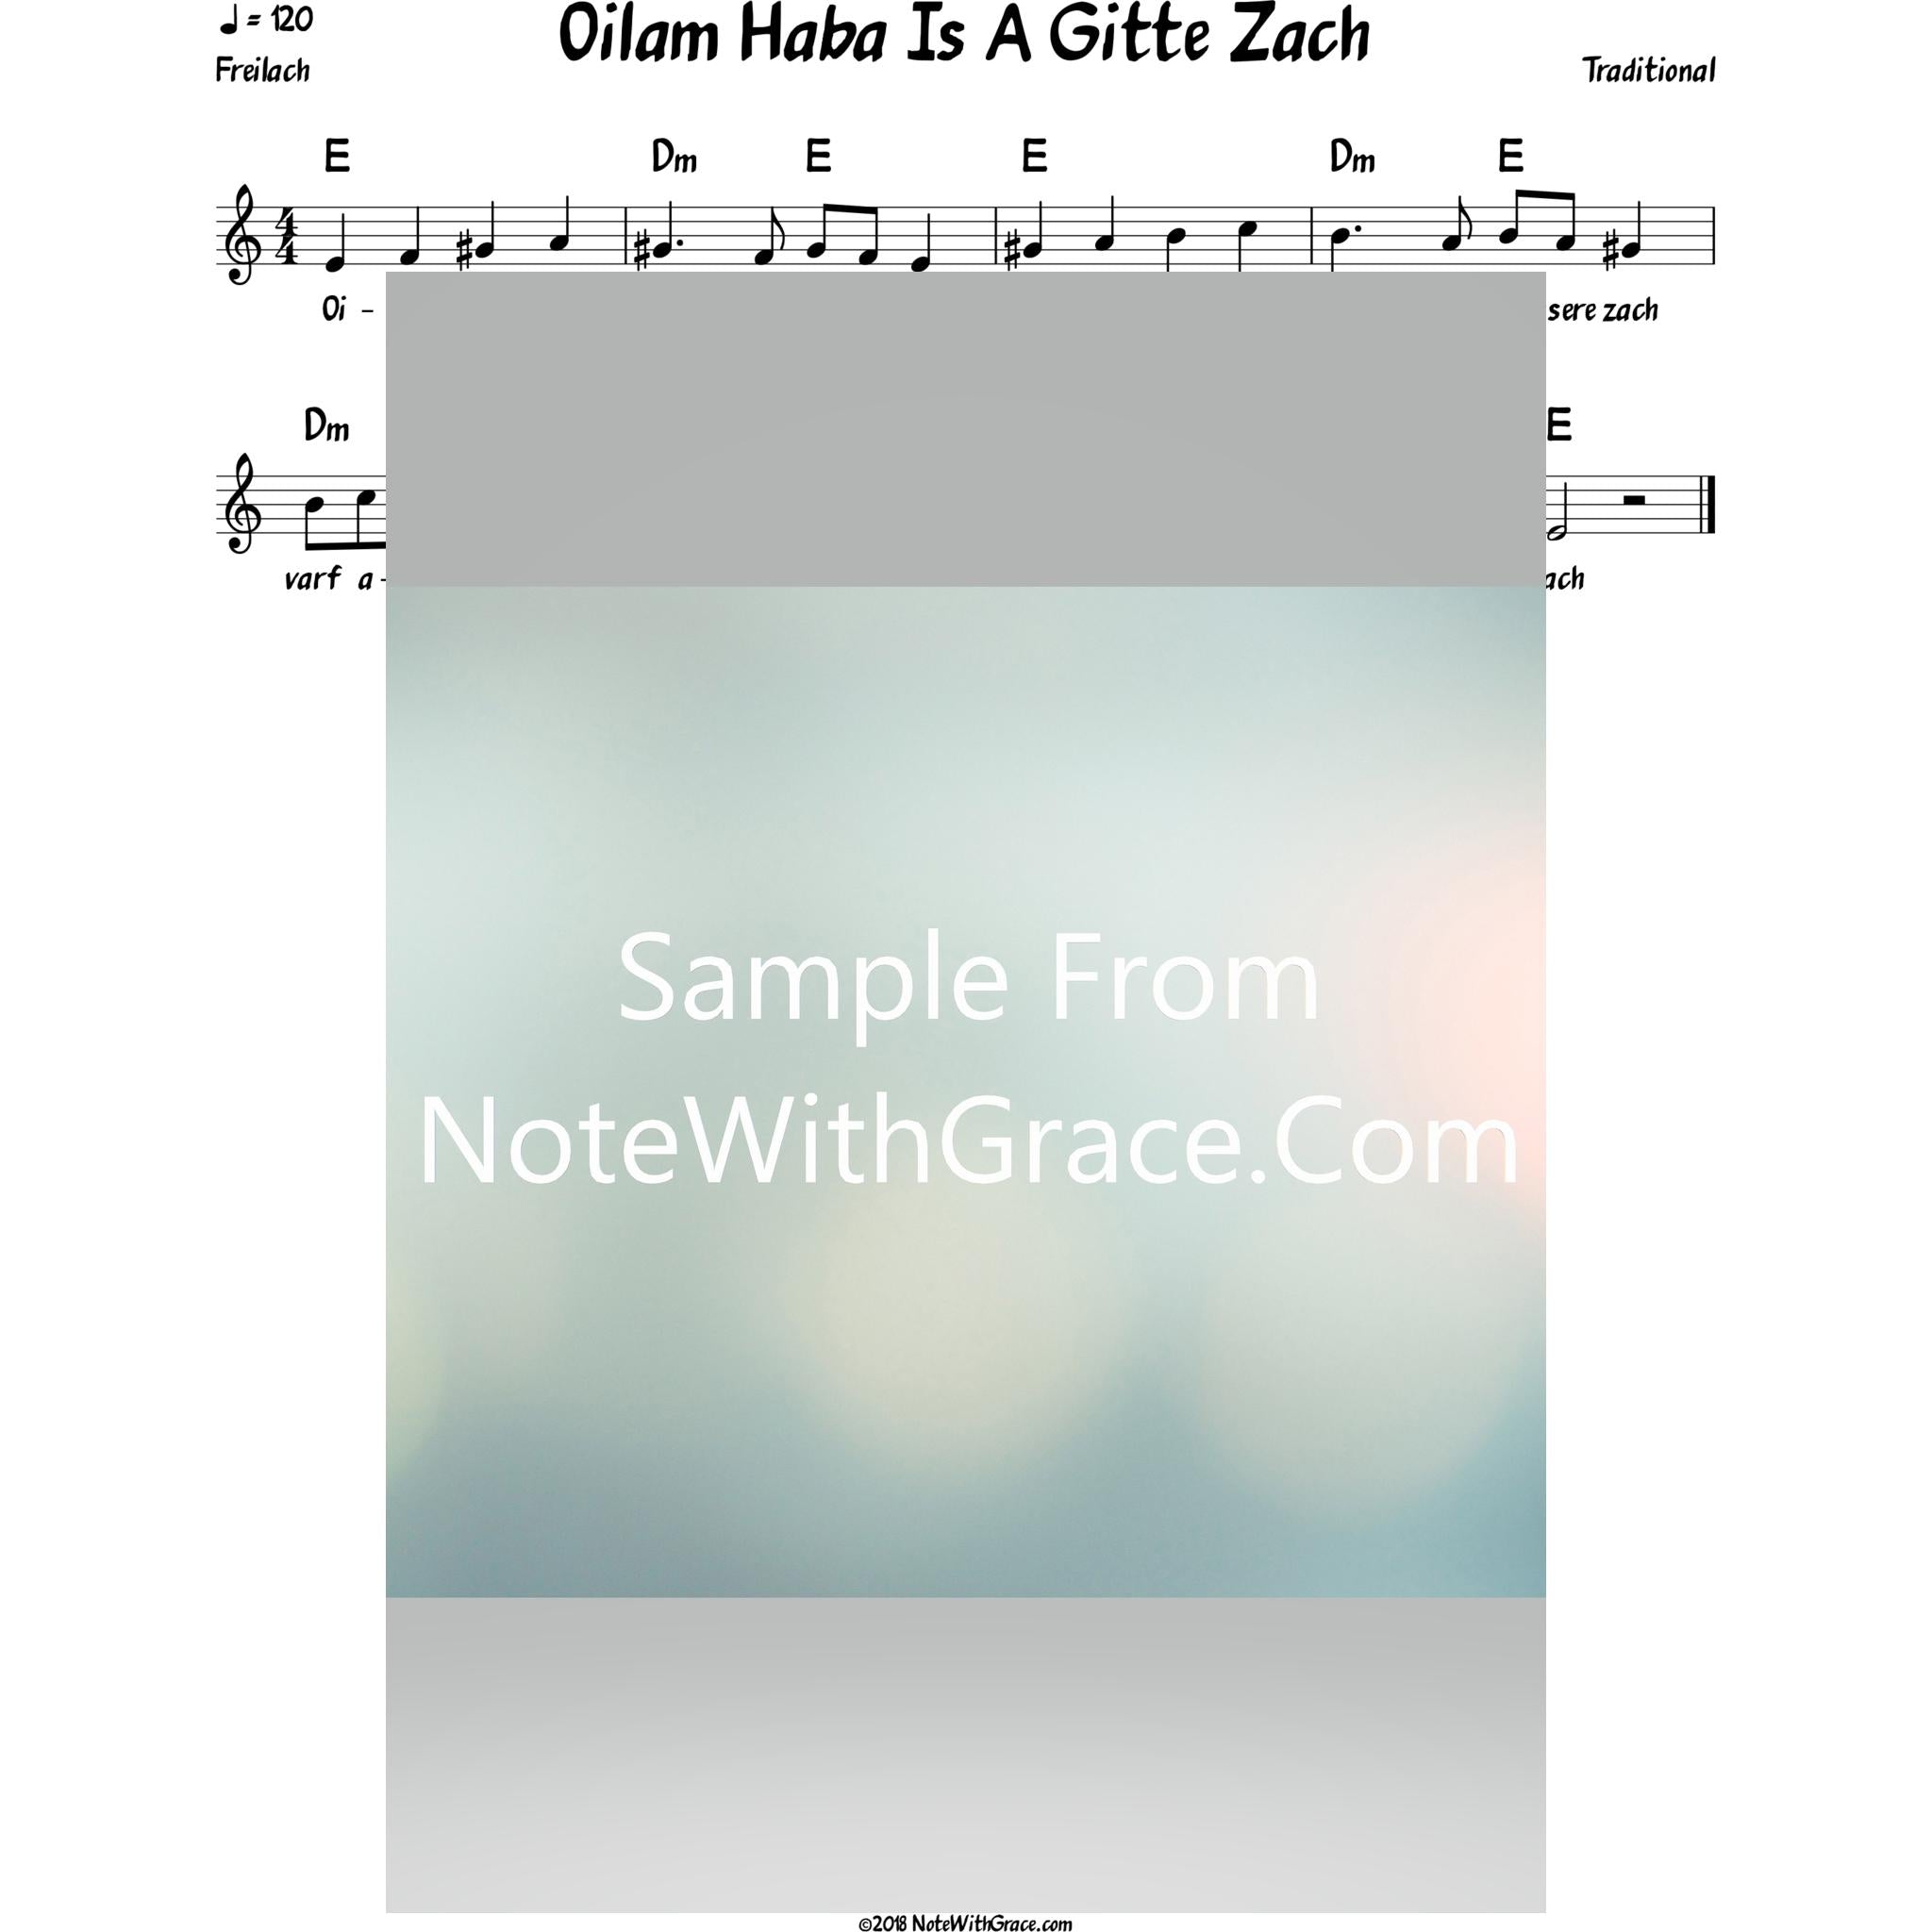 Oilam Haba Is A Gitte Zach Lead Sheet (Traditional)-Sheet music-NoteWithGrace.com